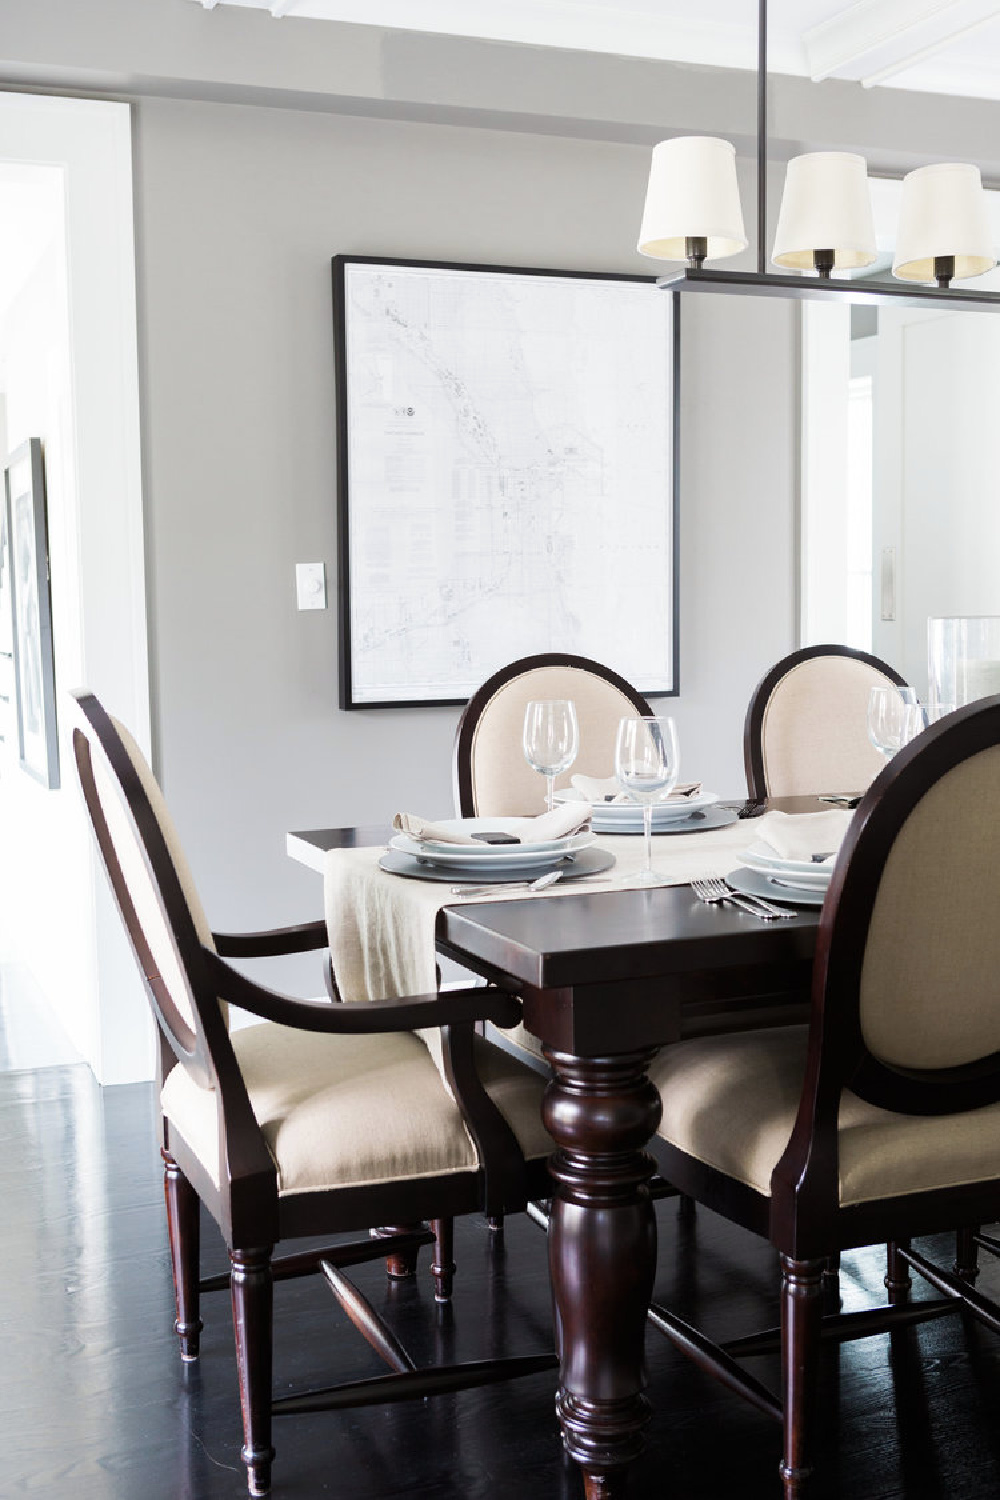 RH Dining room furnishings in a dining room with black hardwood floors and Stonington Gray walls - Hello Lovely Studio.